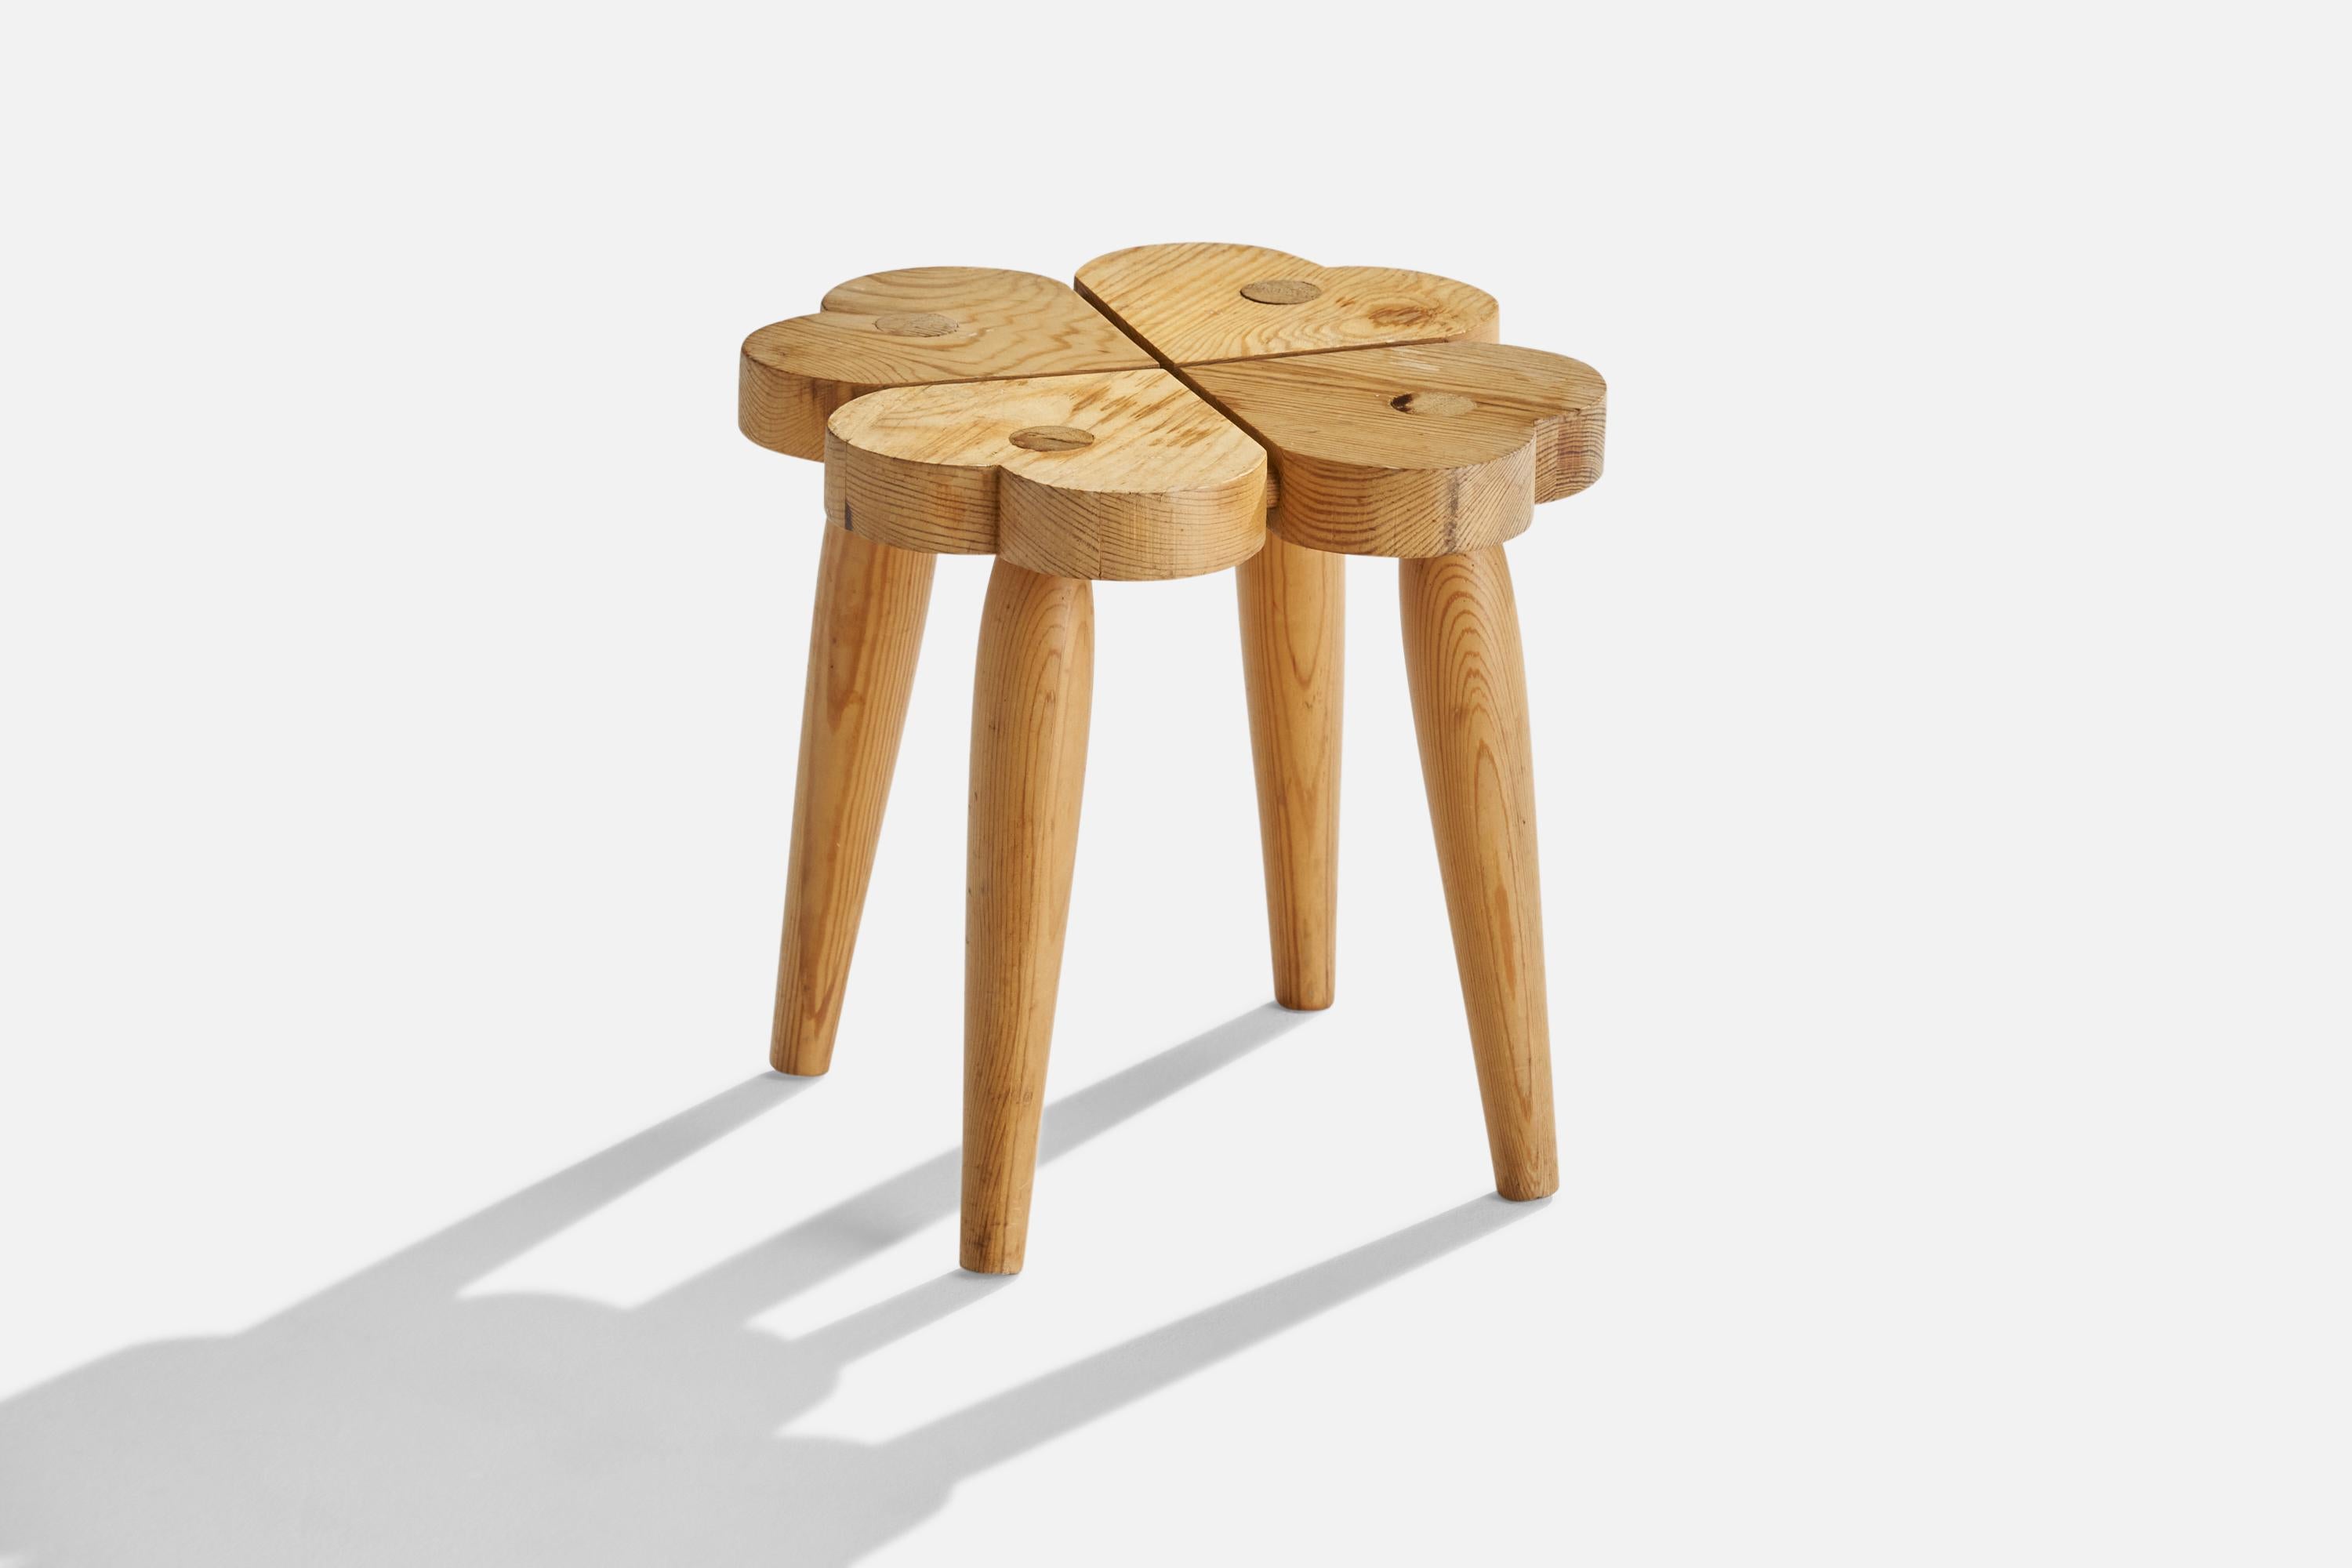 A pine stool designed and produced in Sweden, 1970s.

Seat height 11.75”.